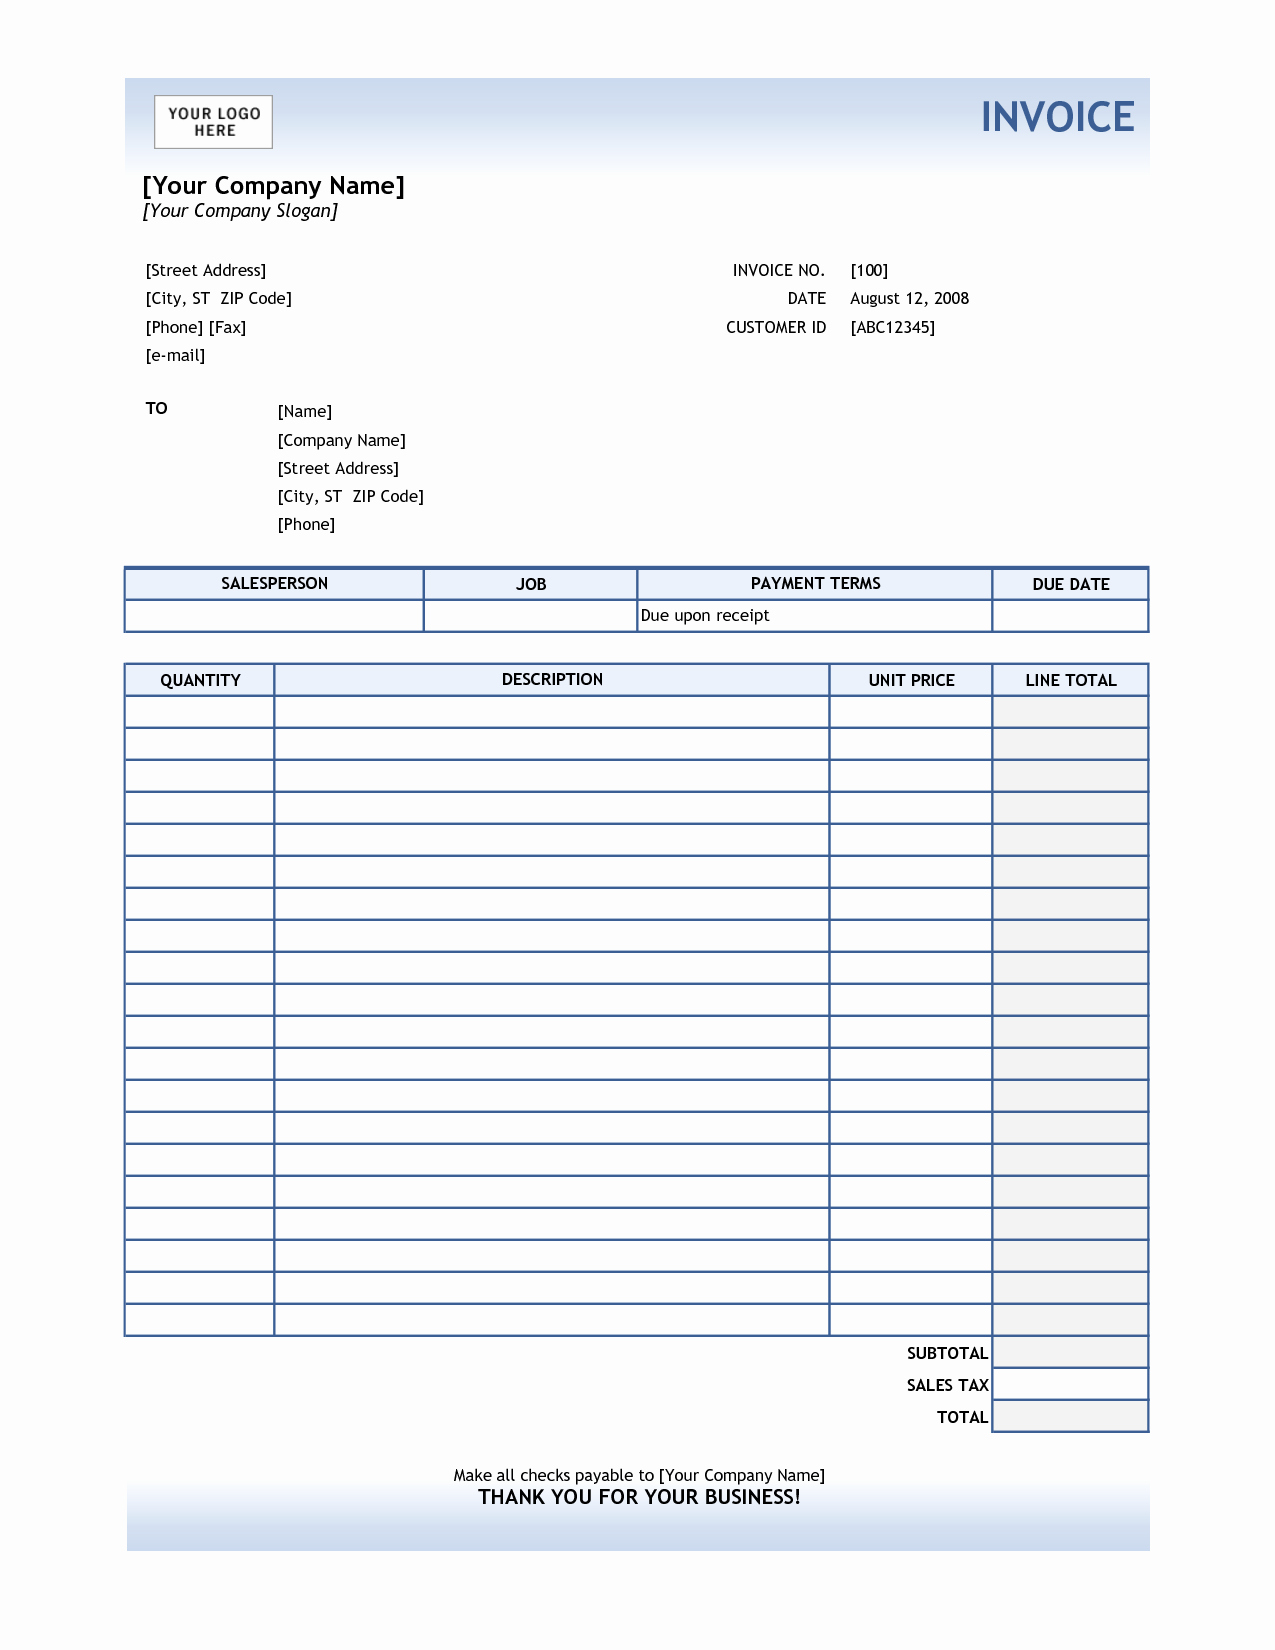 Billing Invoice Template Free Beautiful Service Invoice Template Excel